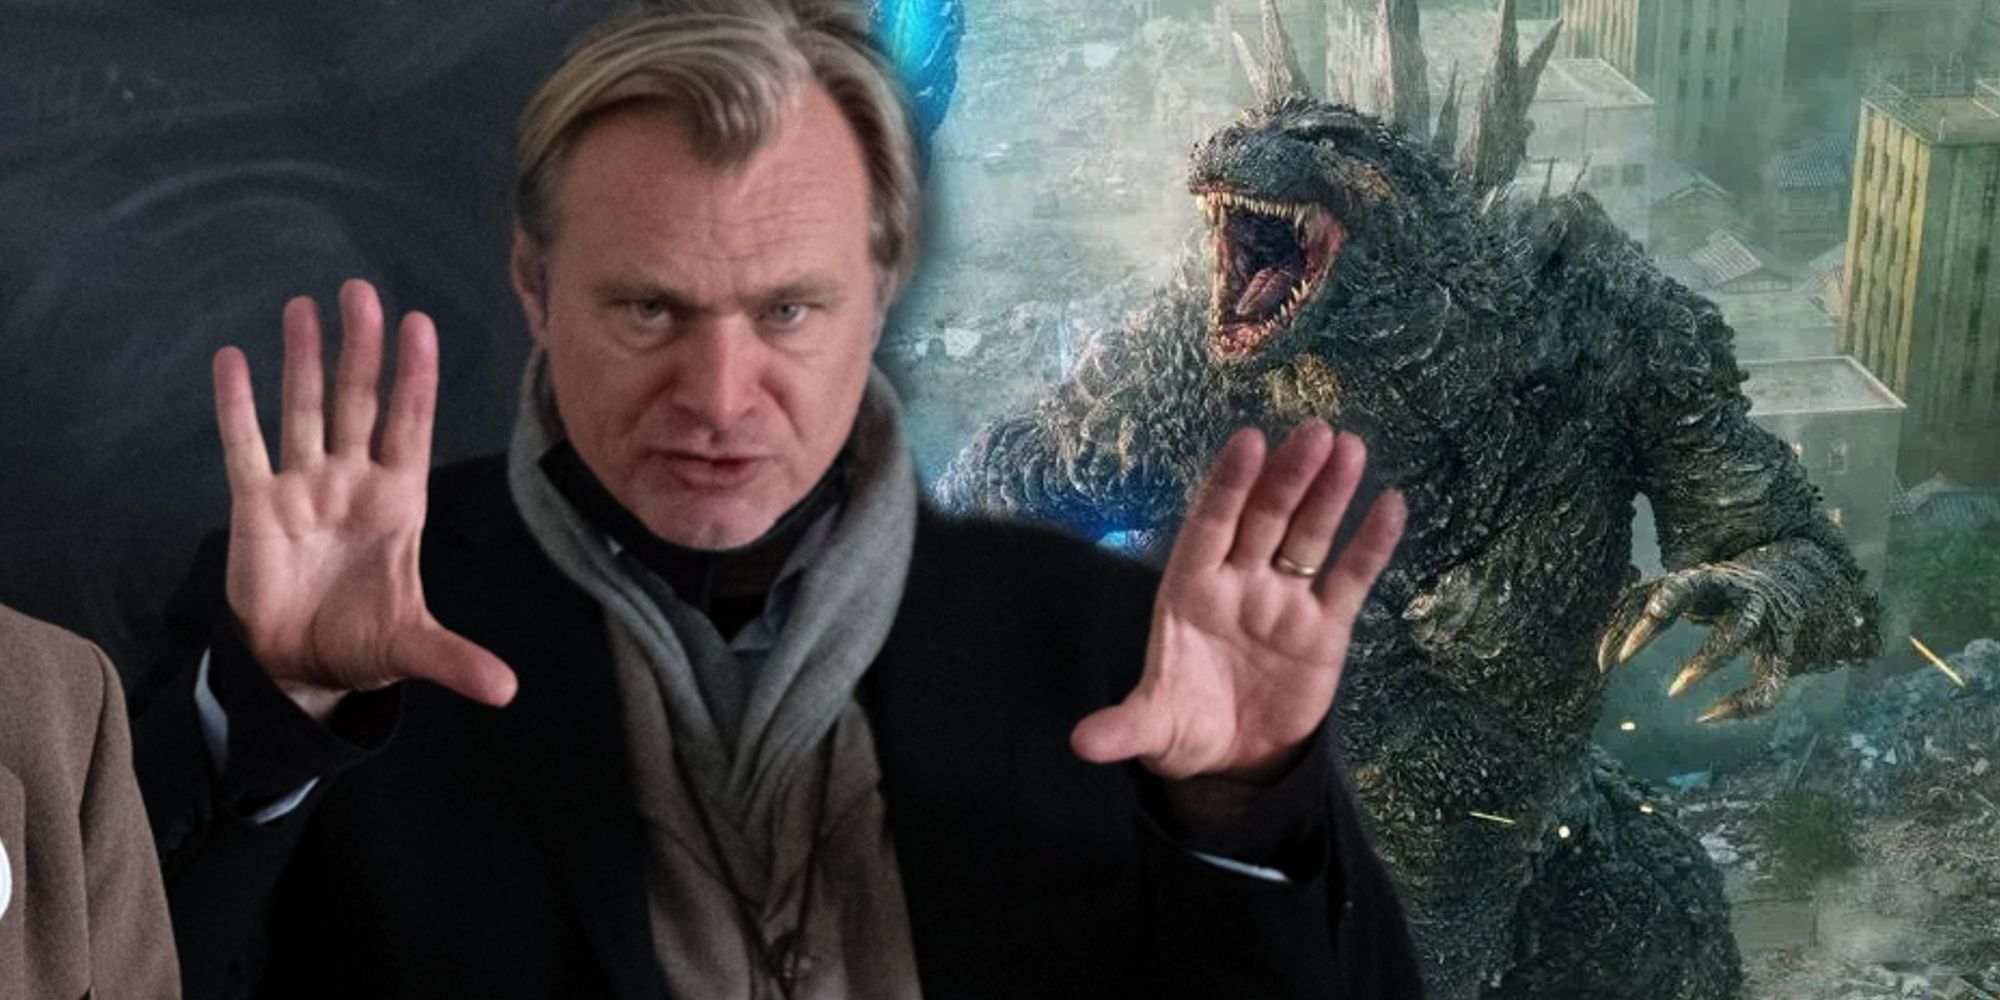 godzilla-minus-one-gets-glowing-review-from-christopher-nolan